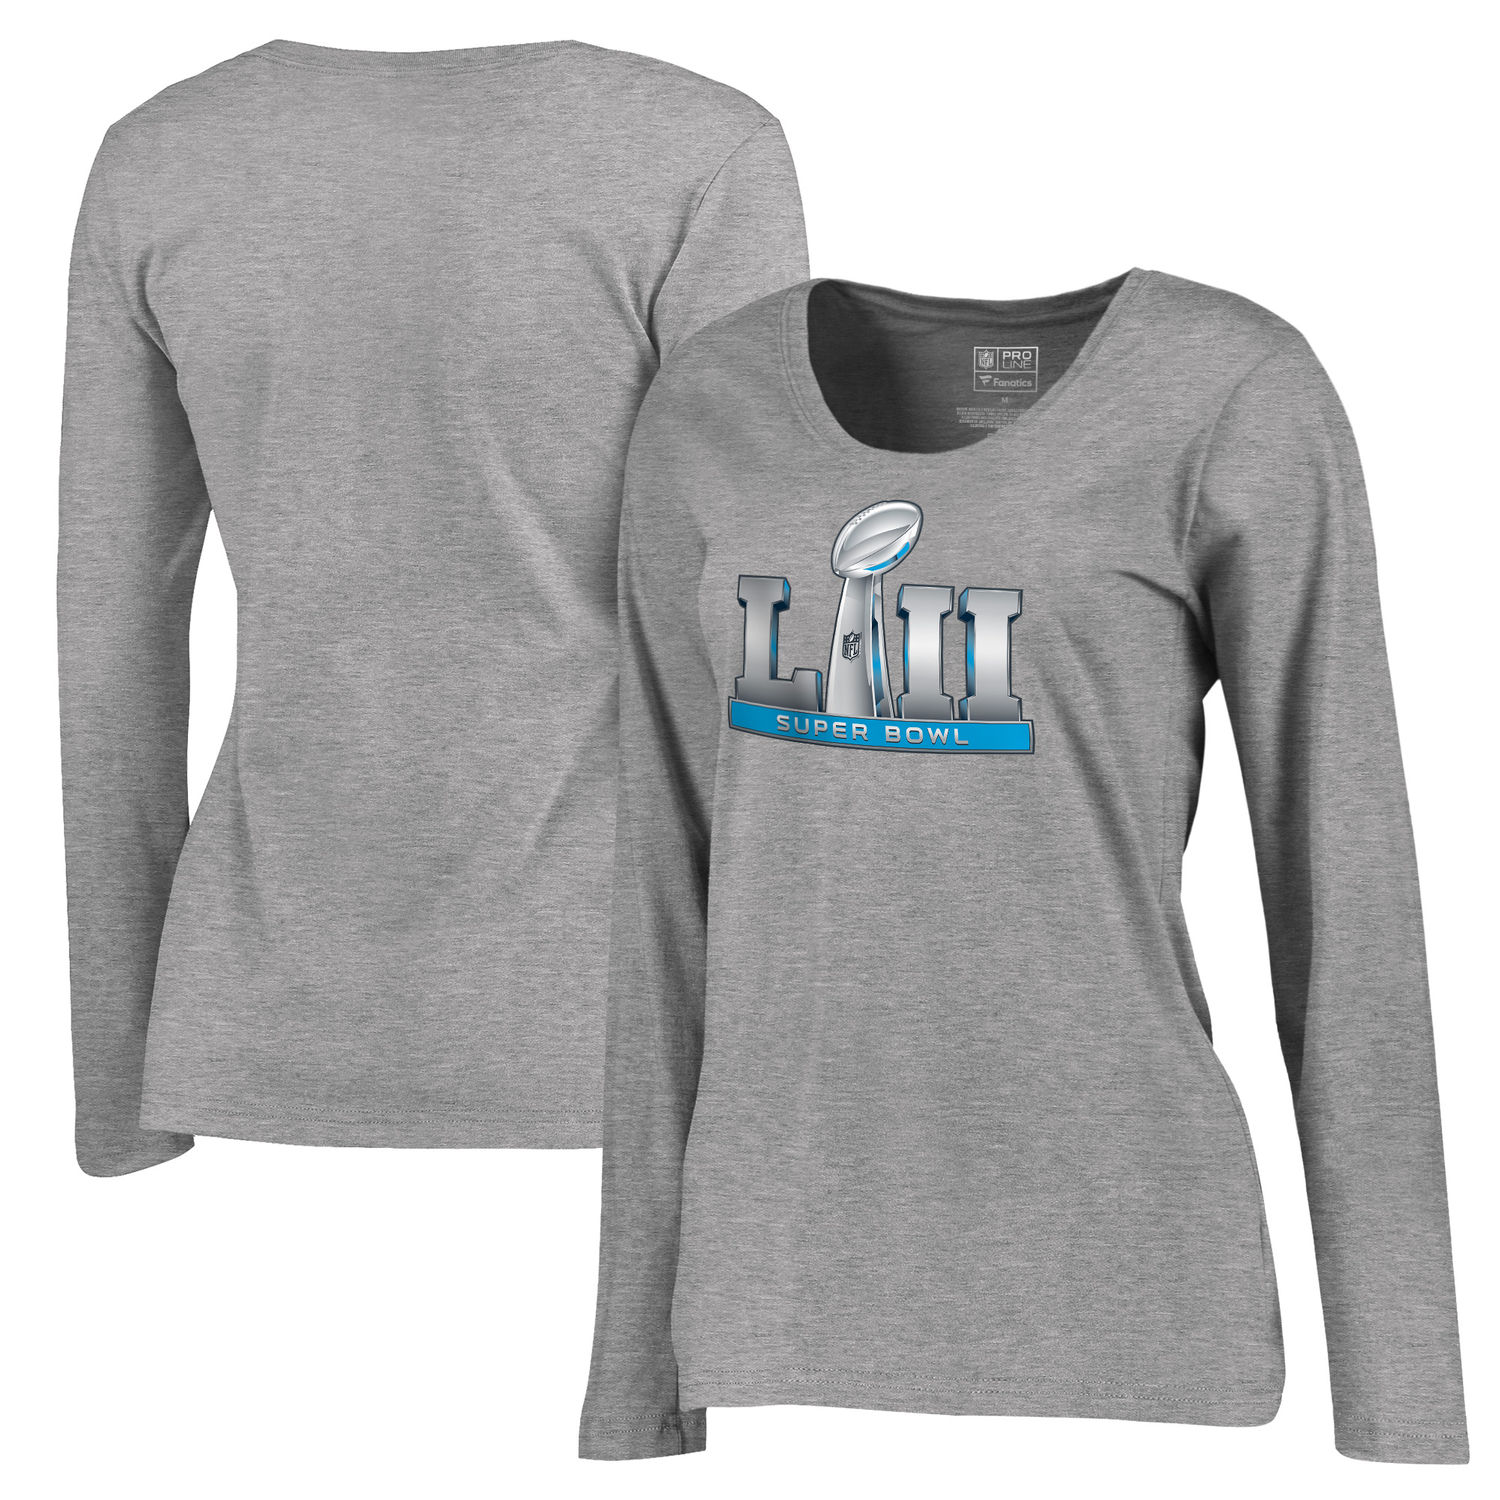 Women's NFL Pro Line by Fanatics Branded Heather Gray Super Bowl LII Event Plus Size V Neck Long Sleeve T Shirt